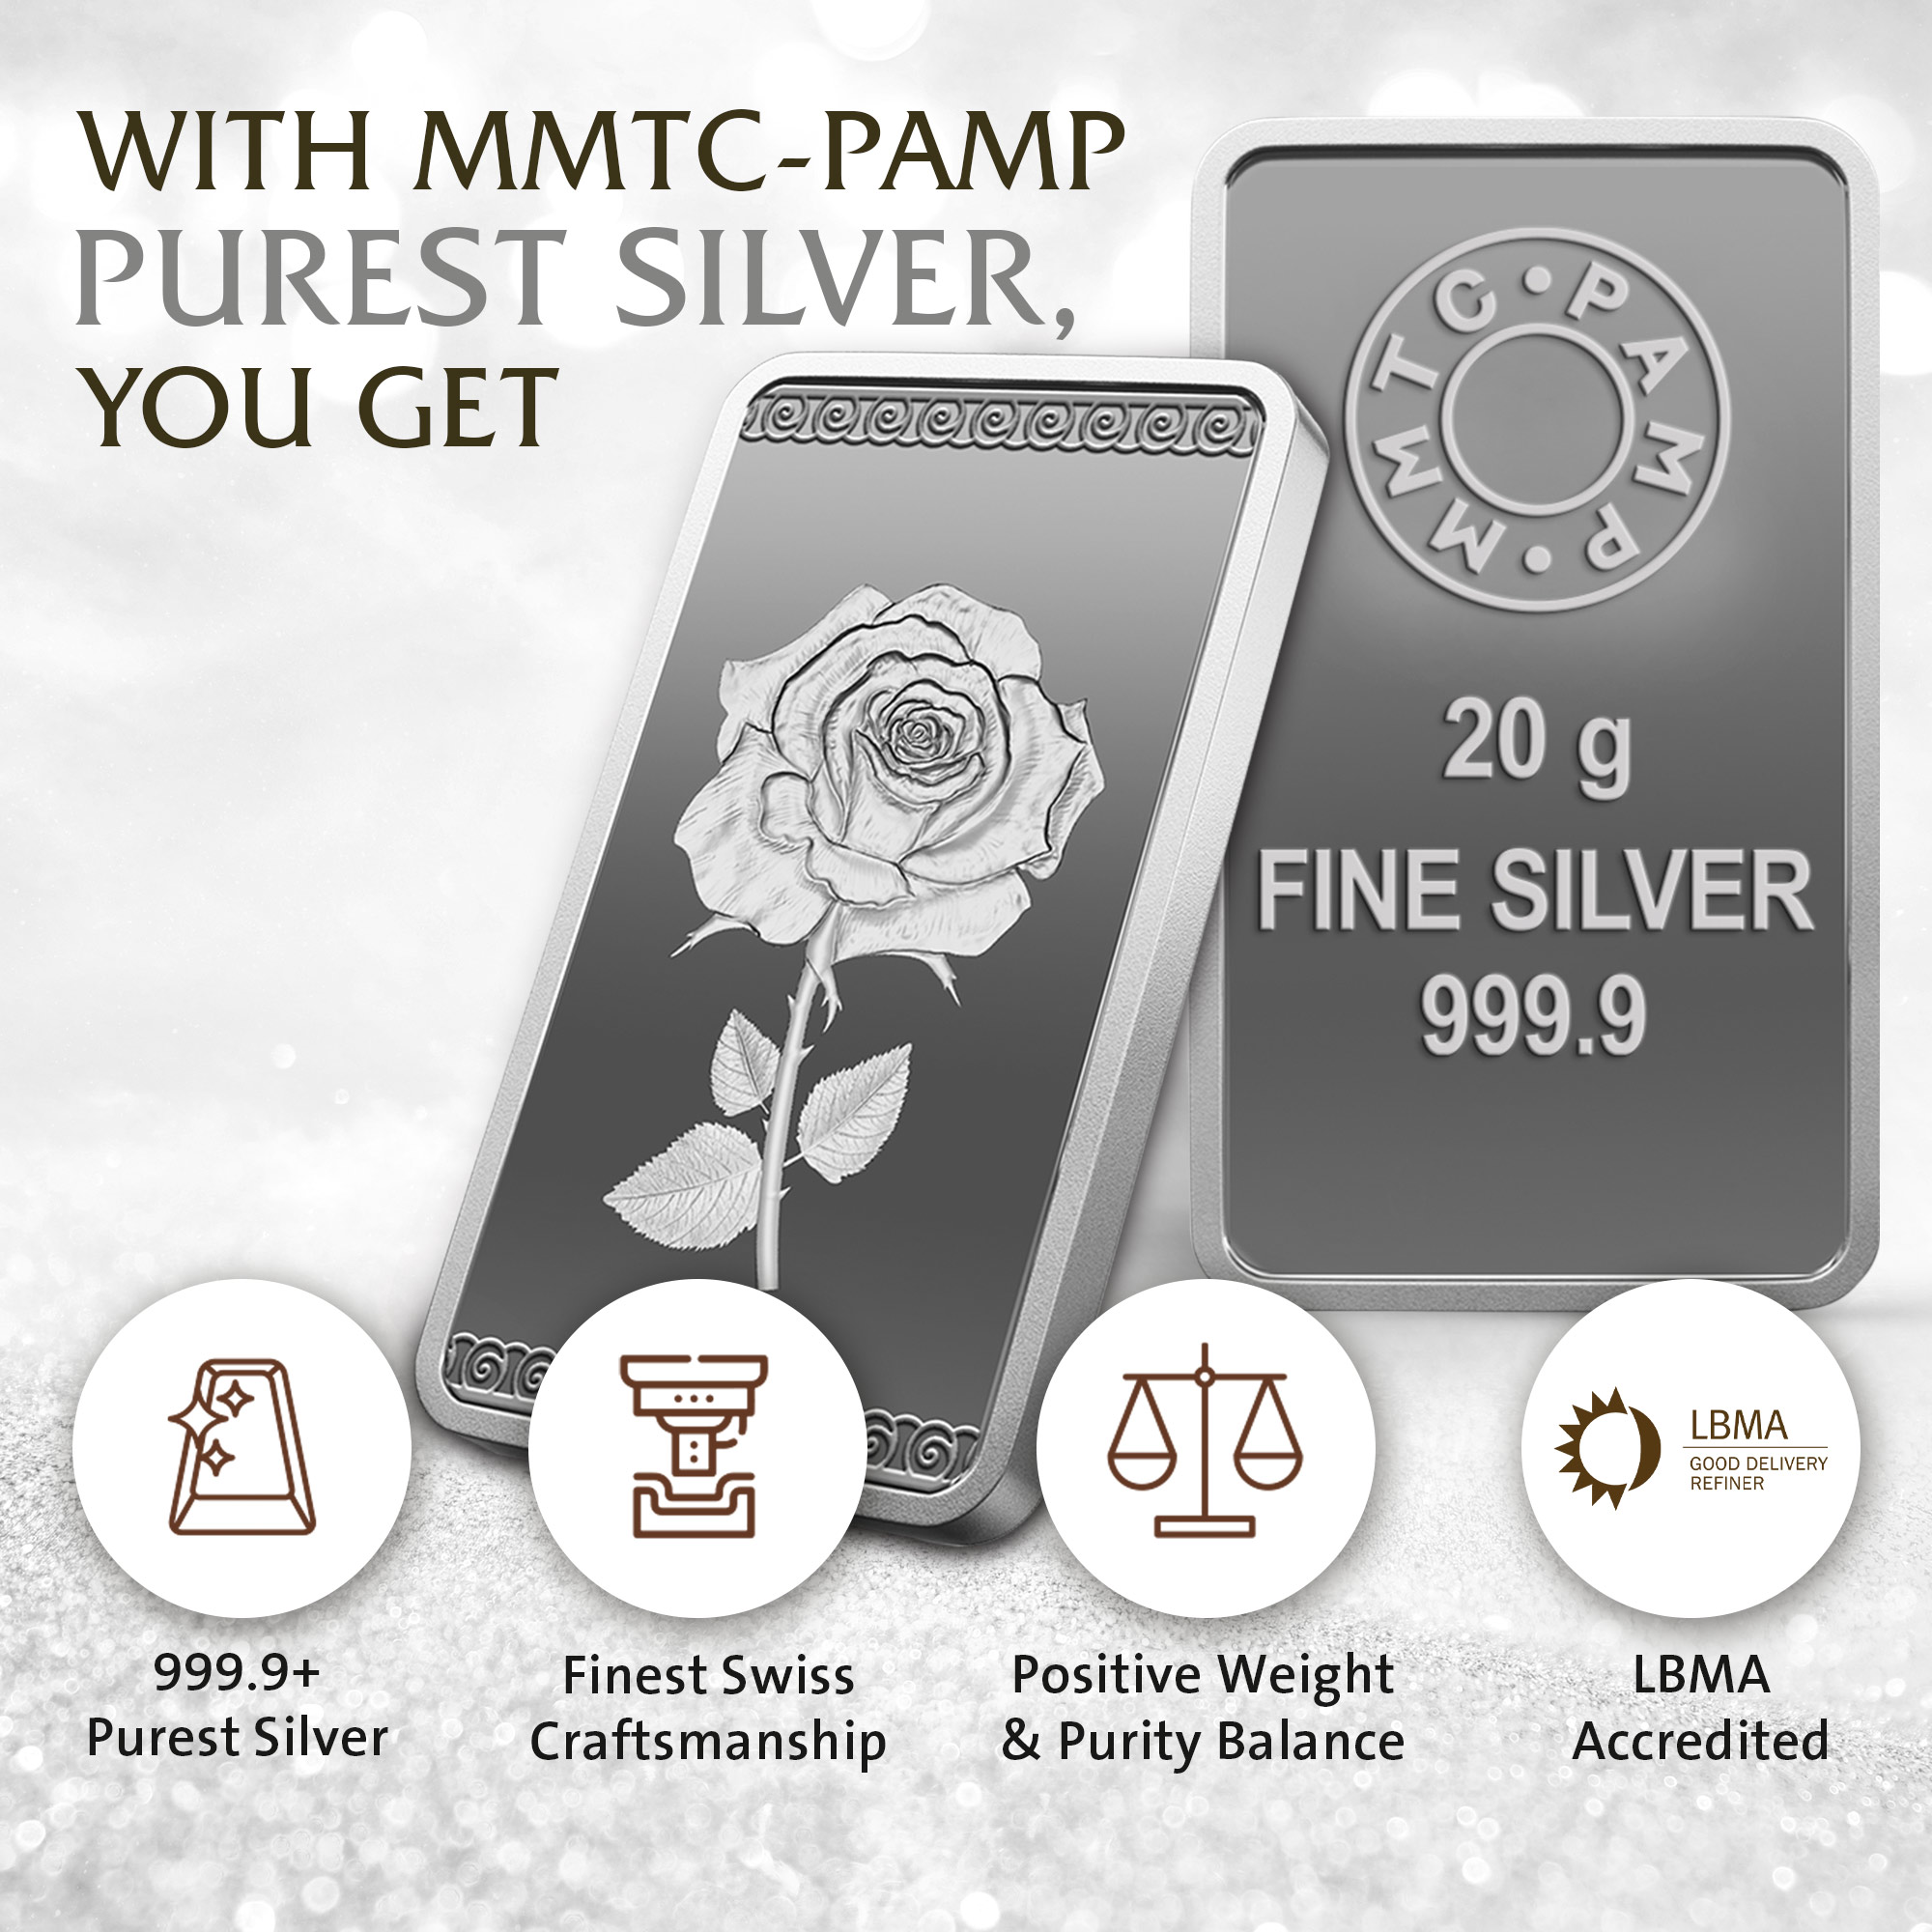 https://shop.mmtcpamp.com/ROSE (999.9) PURITY 20 GM SILVER BAR5